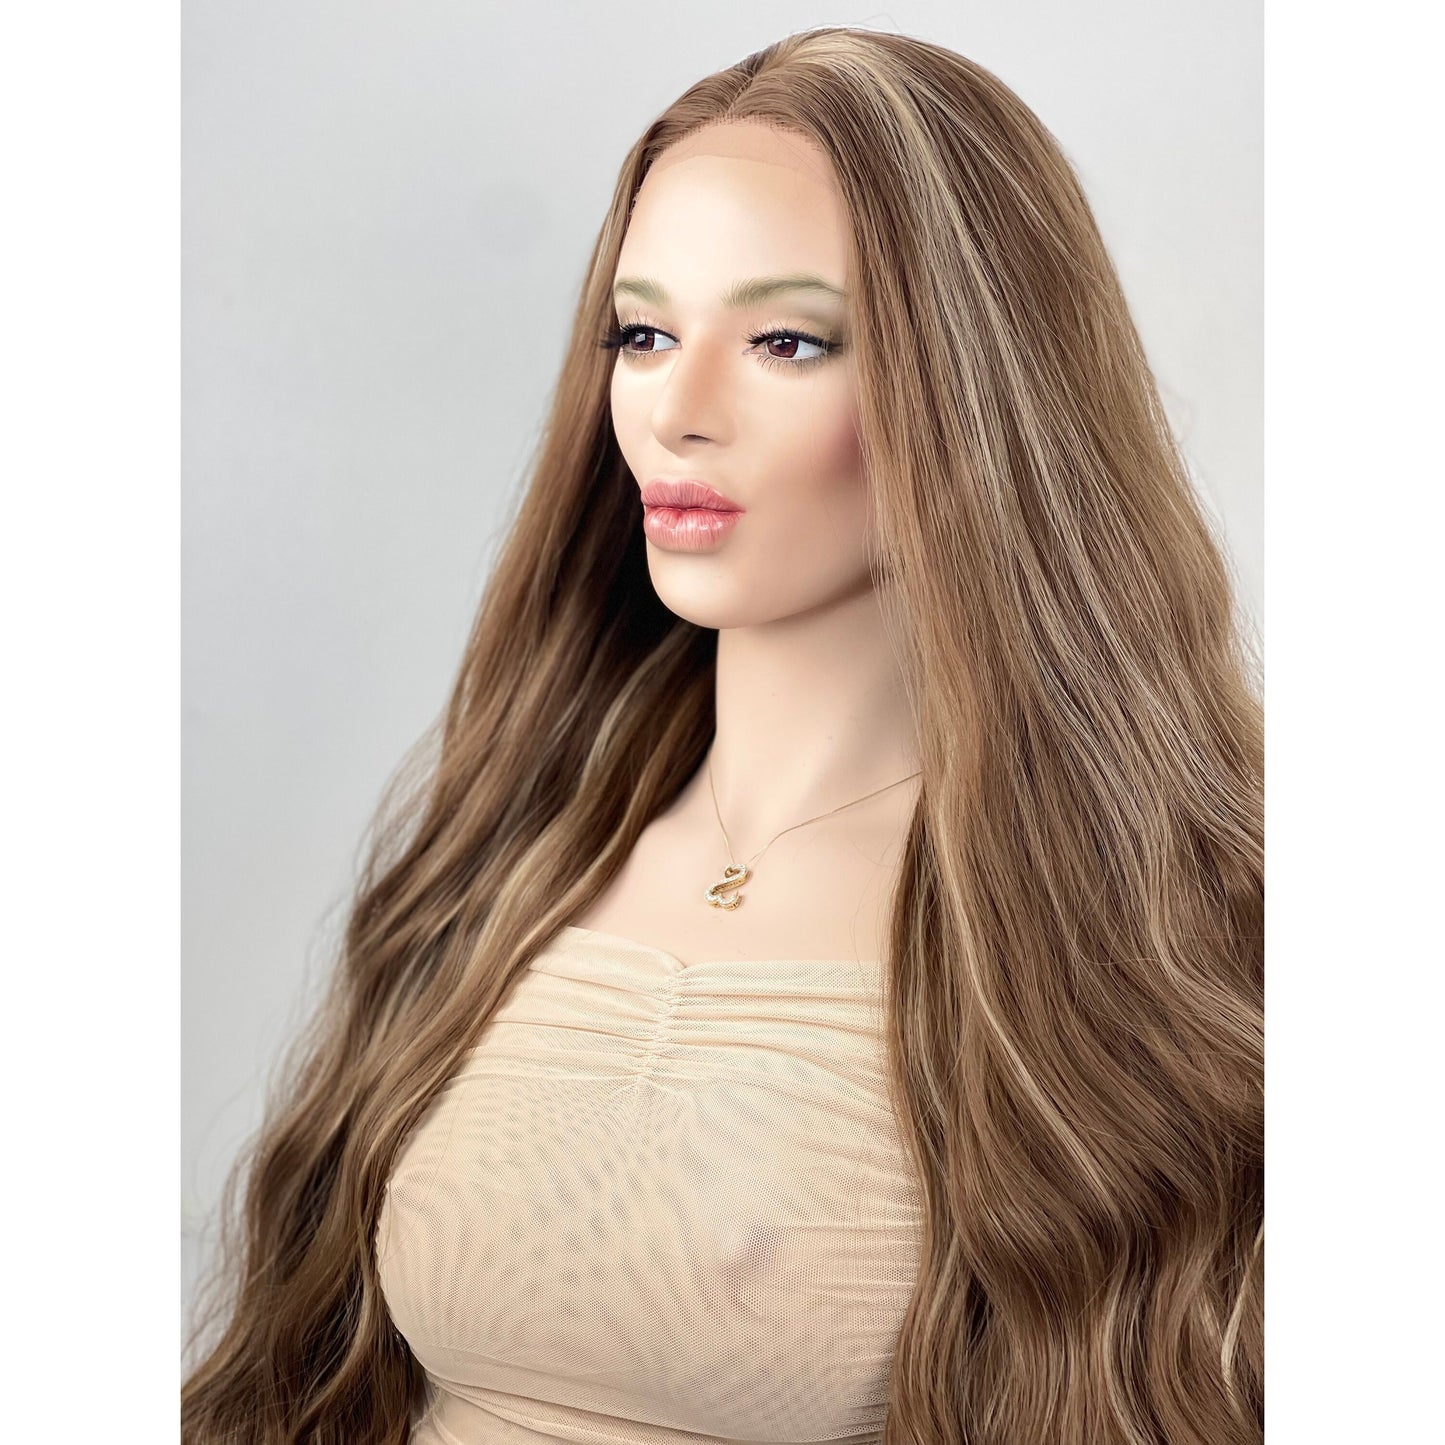 Medium Brown Blonde Highlights Wavy 13x3 Preplucked Free Part Wig, Swiss Lace Front, Heat Resistant Human Hair Blend Wig